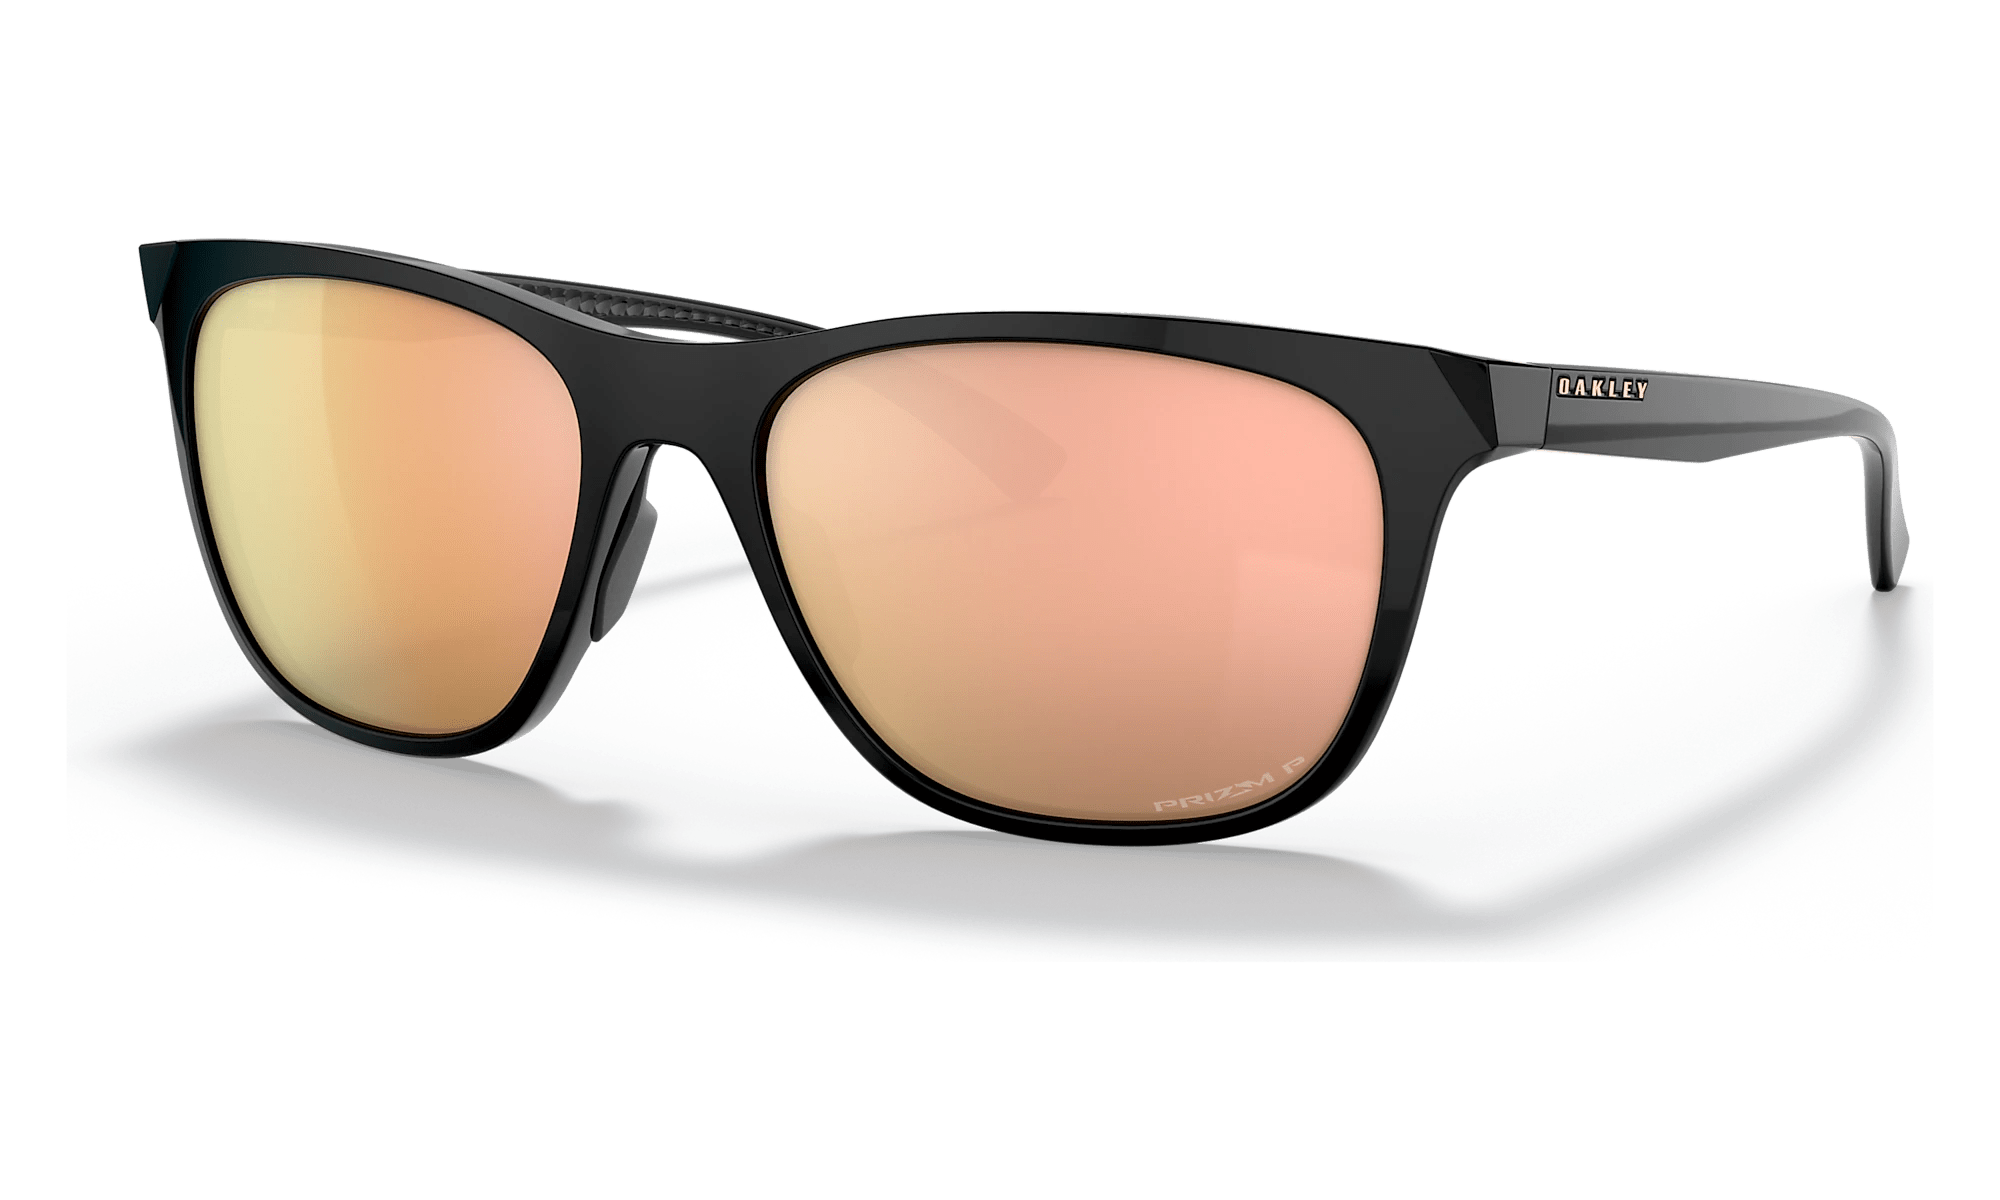 Best Women's Polarized Sunglasses for Fishing and Hiking - Wide Open Spaces